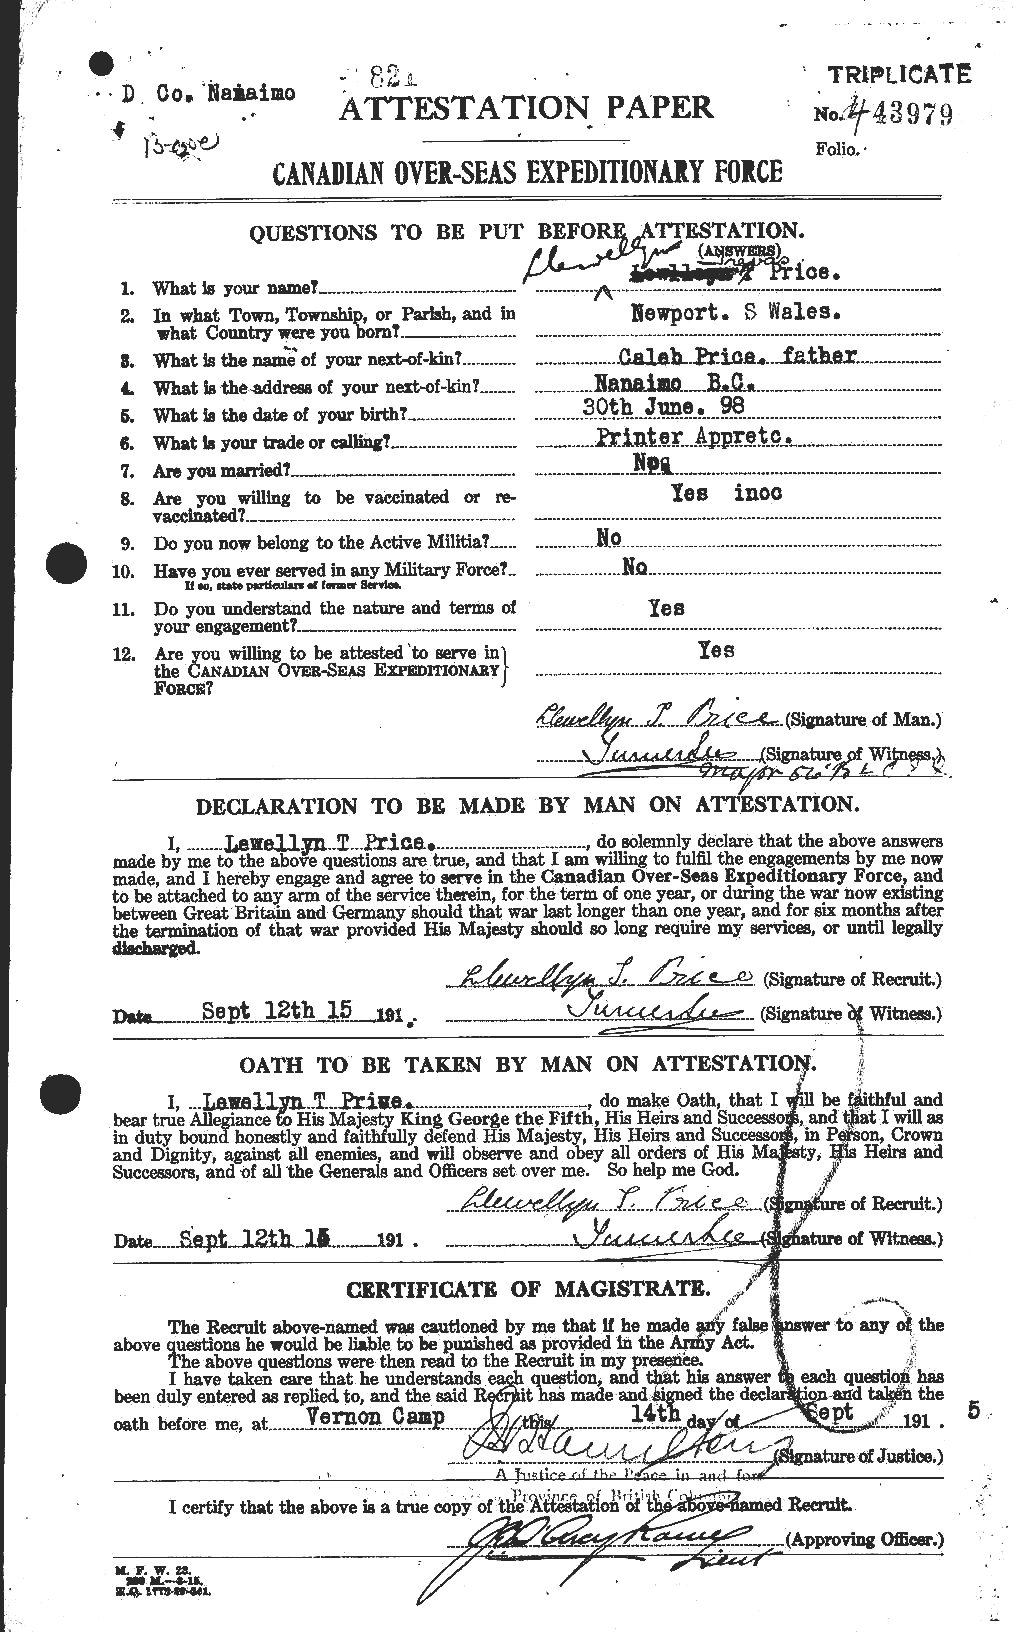 Personnel Records of the First World War - CEF 587289a